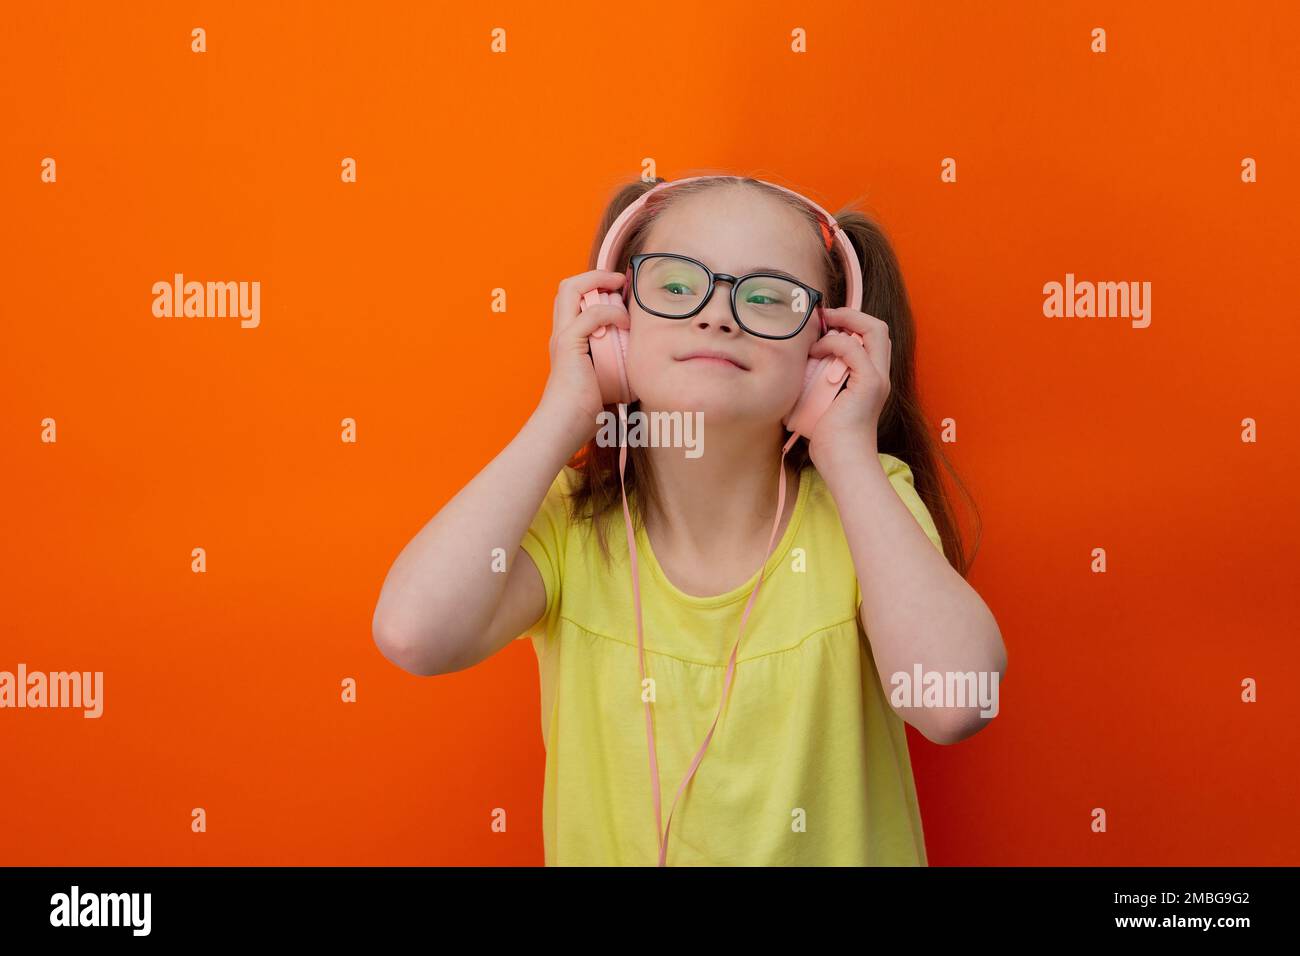 Girl with Down syndrome listens to music. Orange background Stock Photo